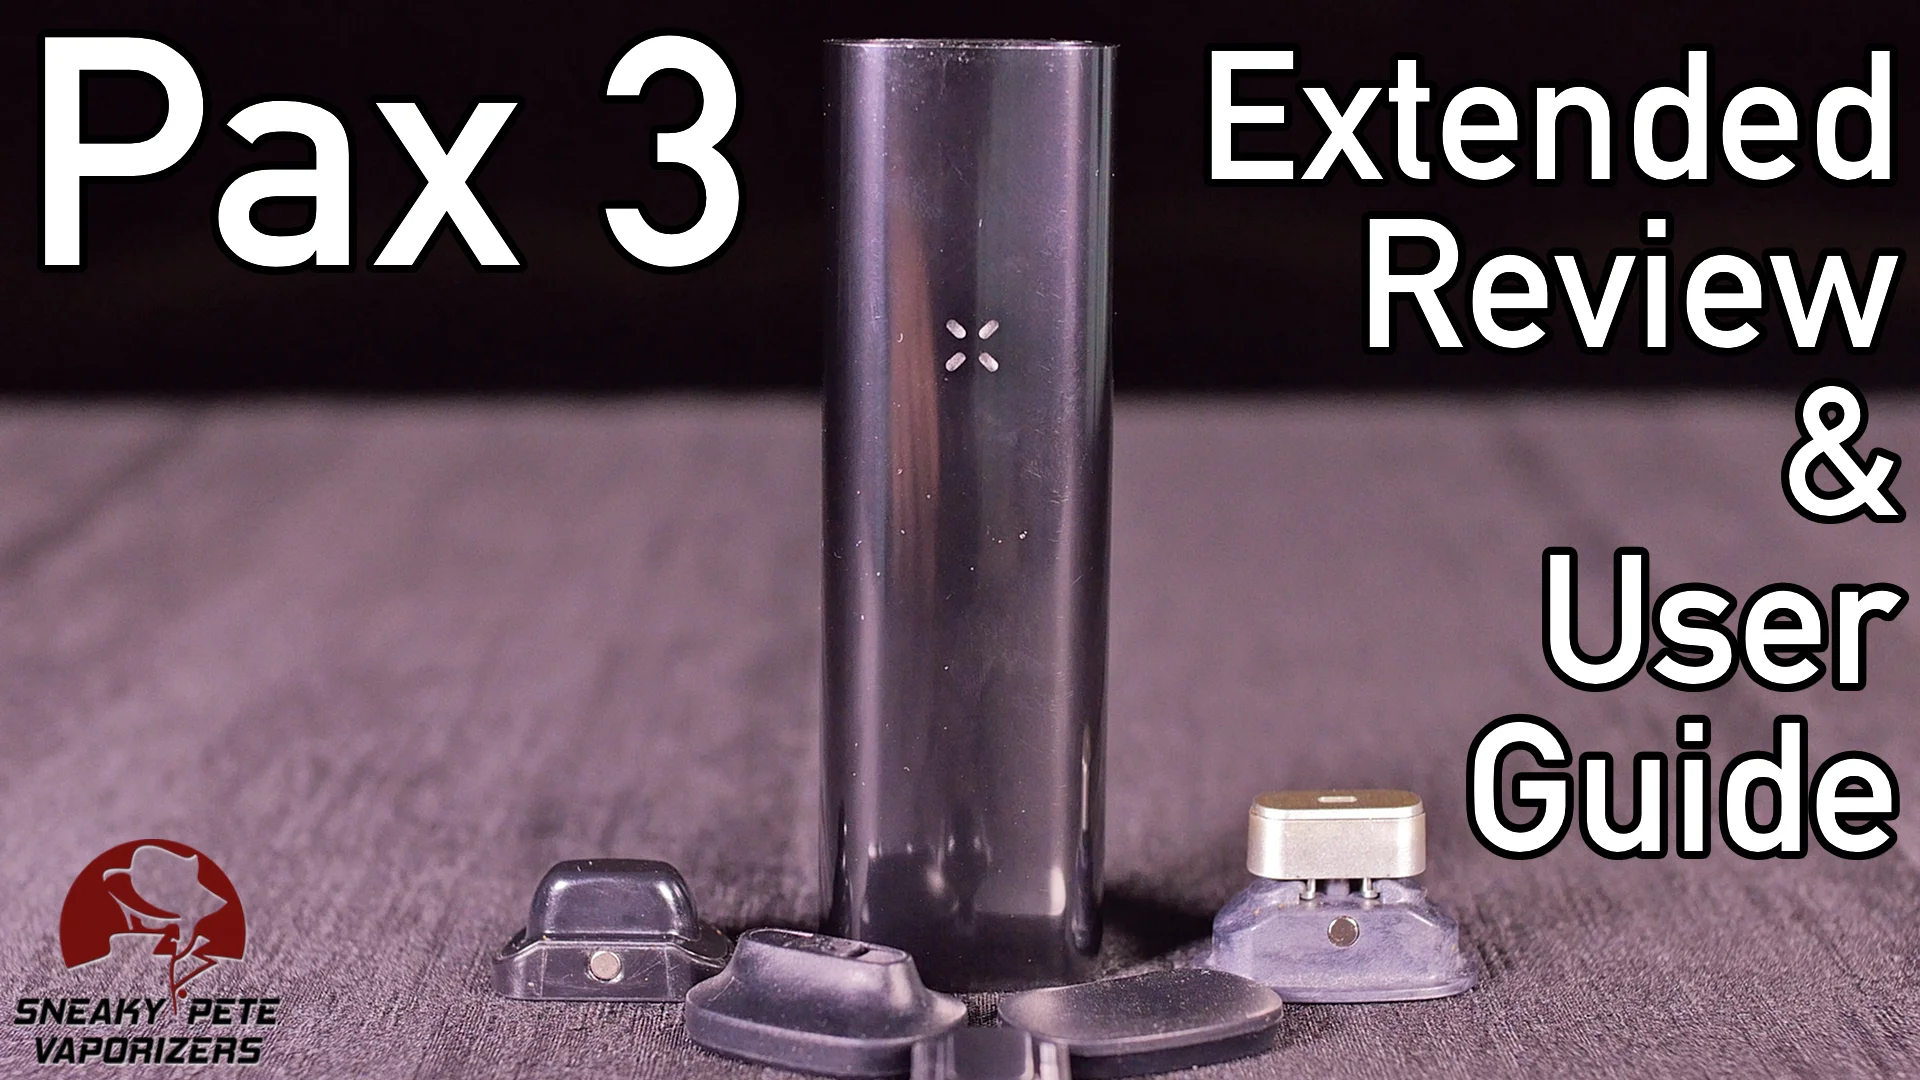 PAX 3 Review & User Guide  Sneaky Pete's Vaporizer Reviews on Vimeo